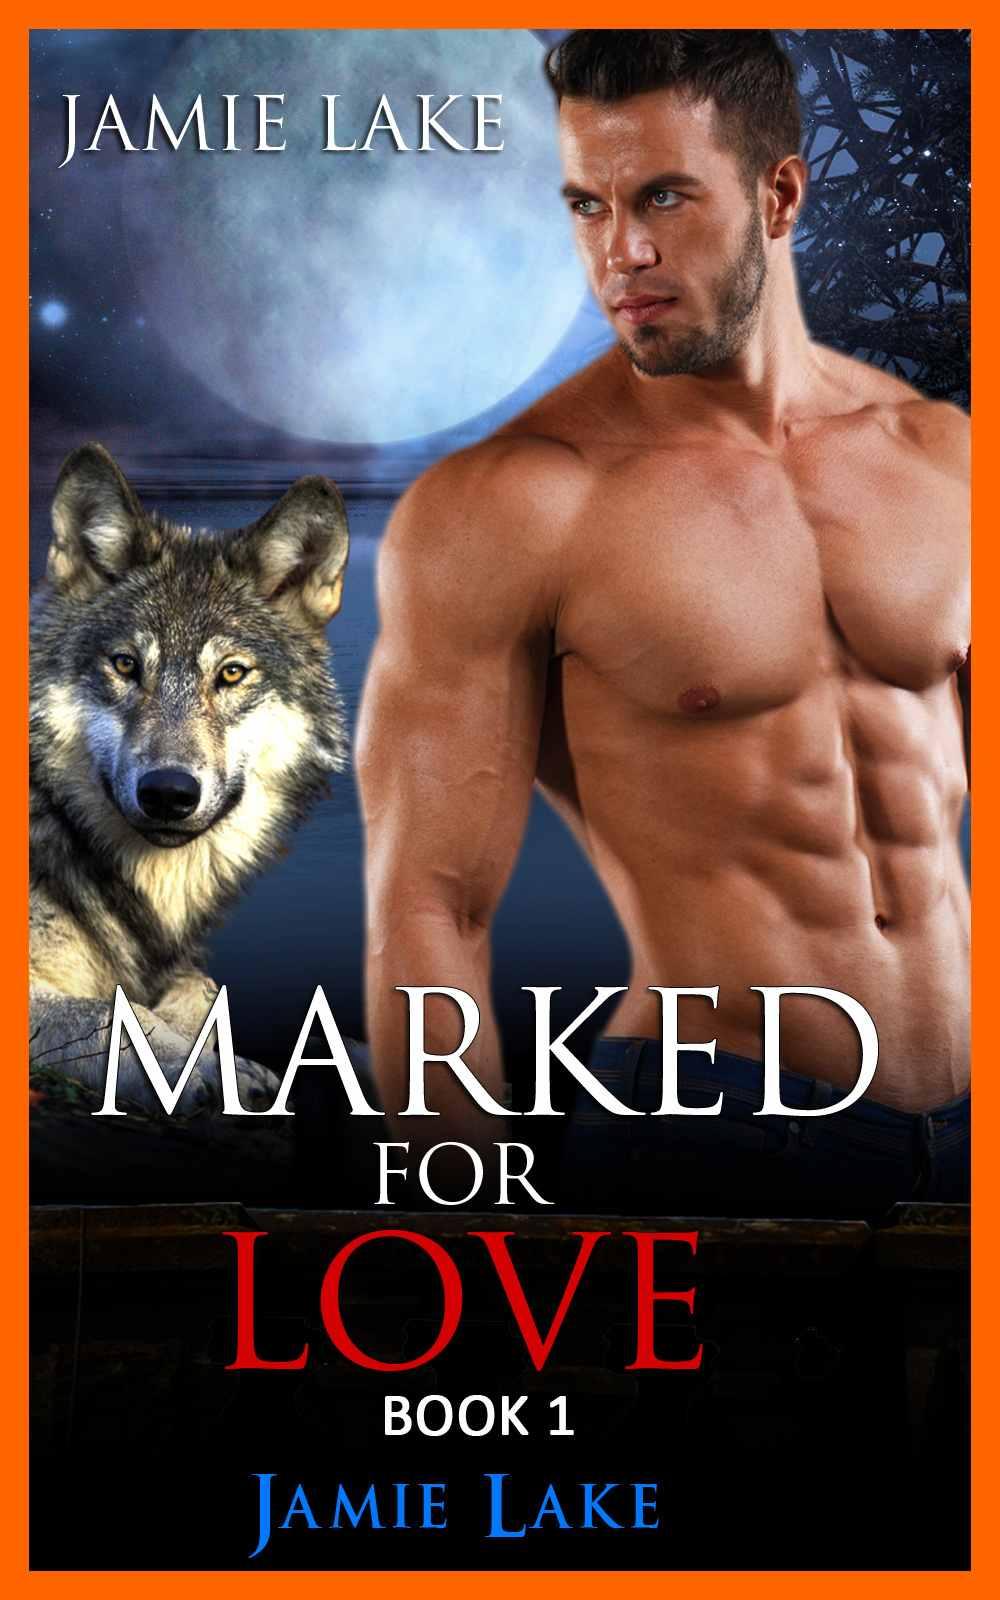 Marked for Love 1 by Jamie Lake